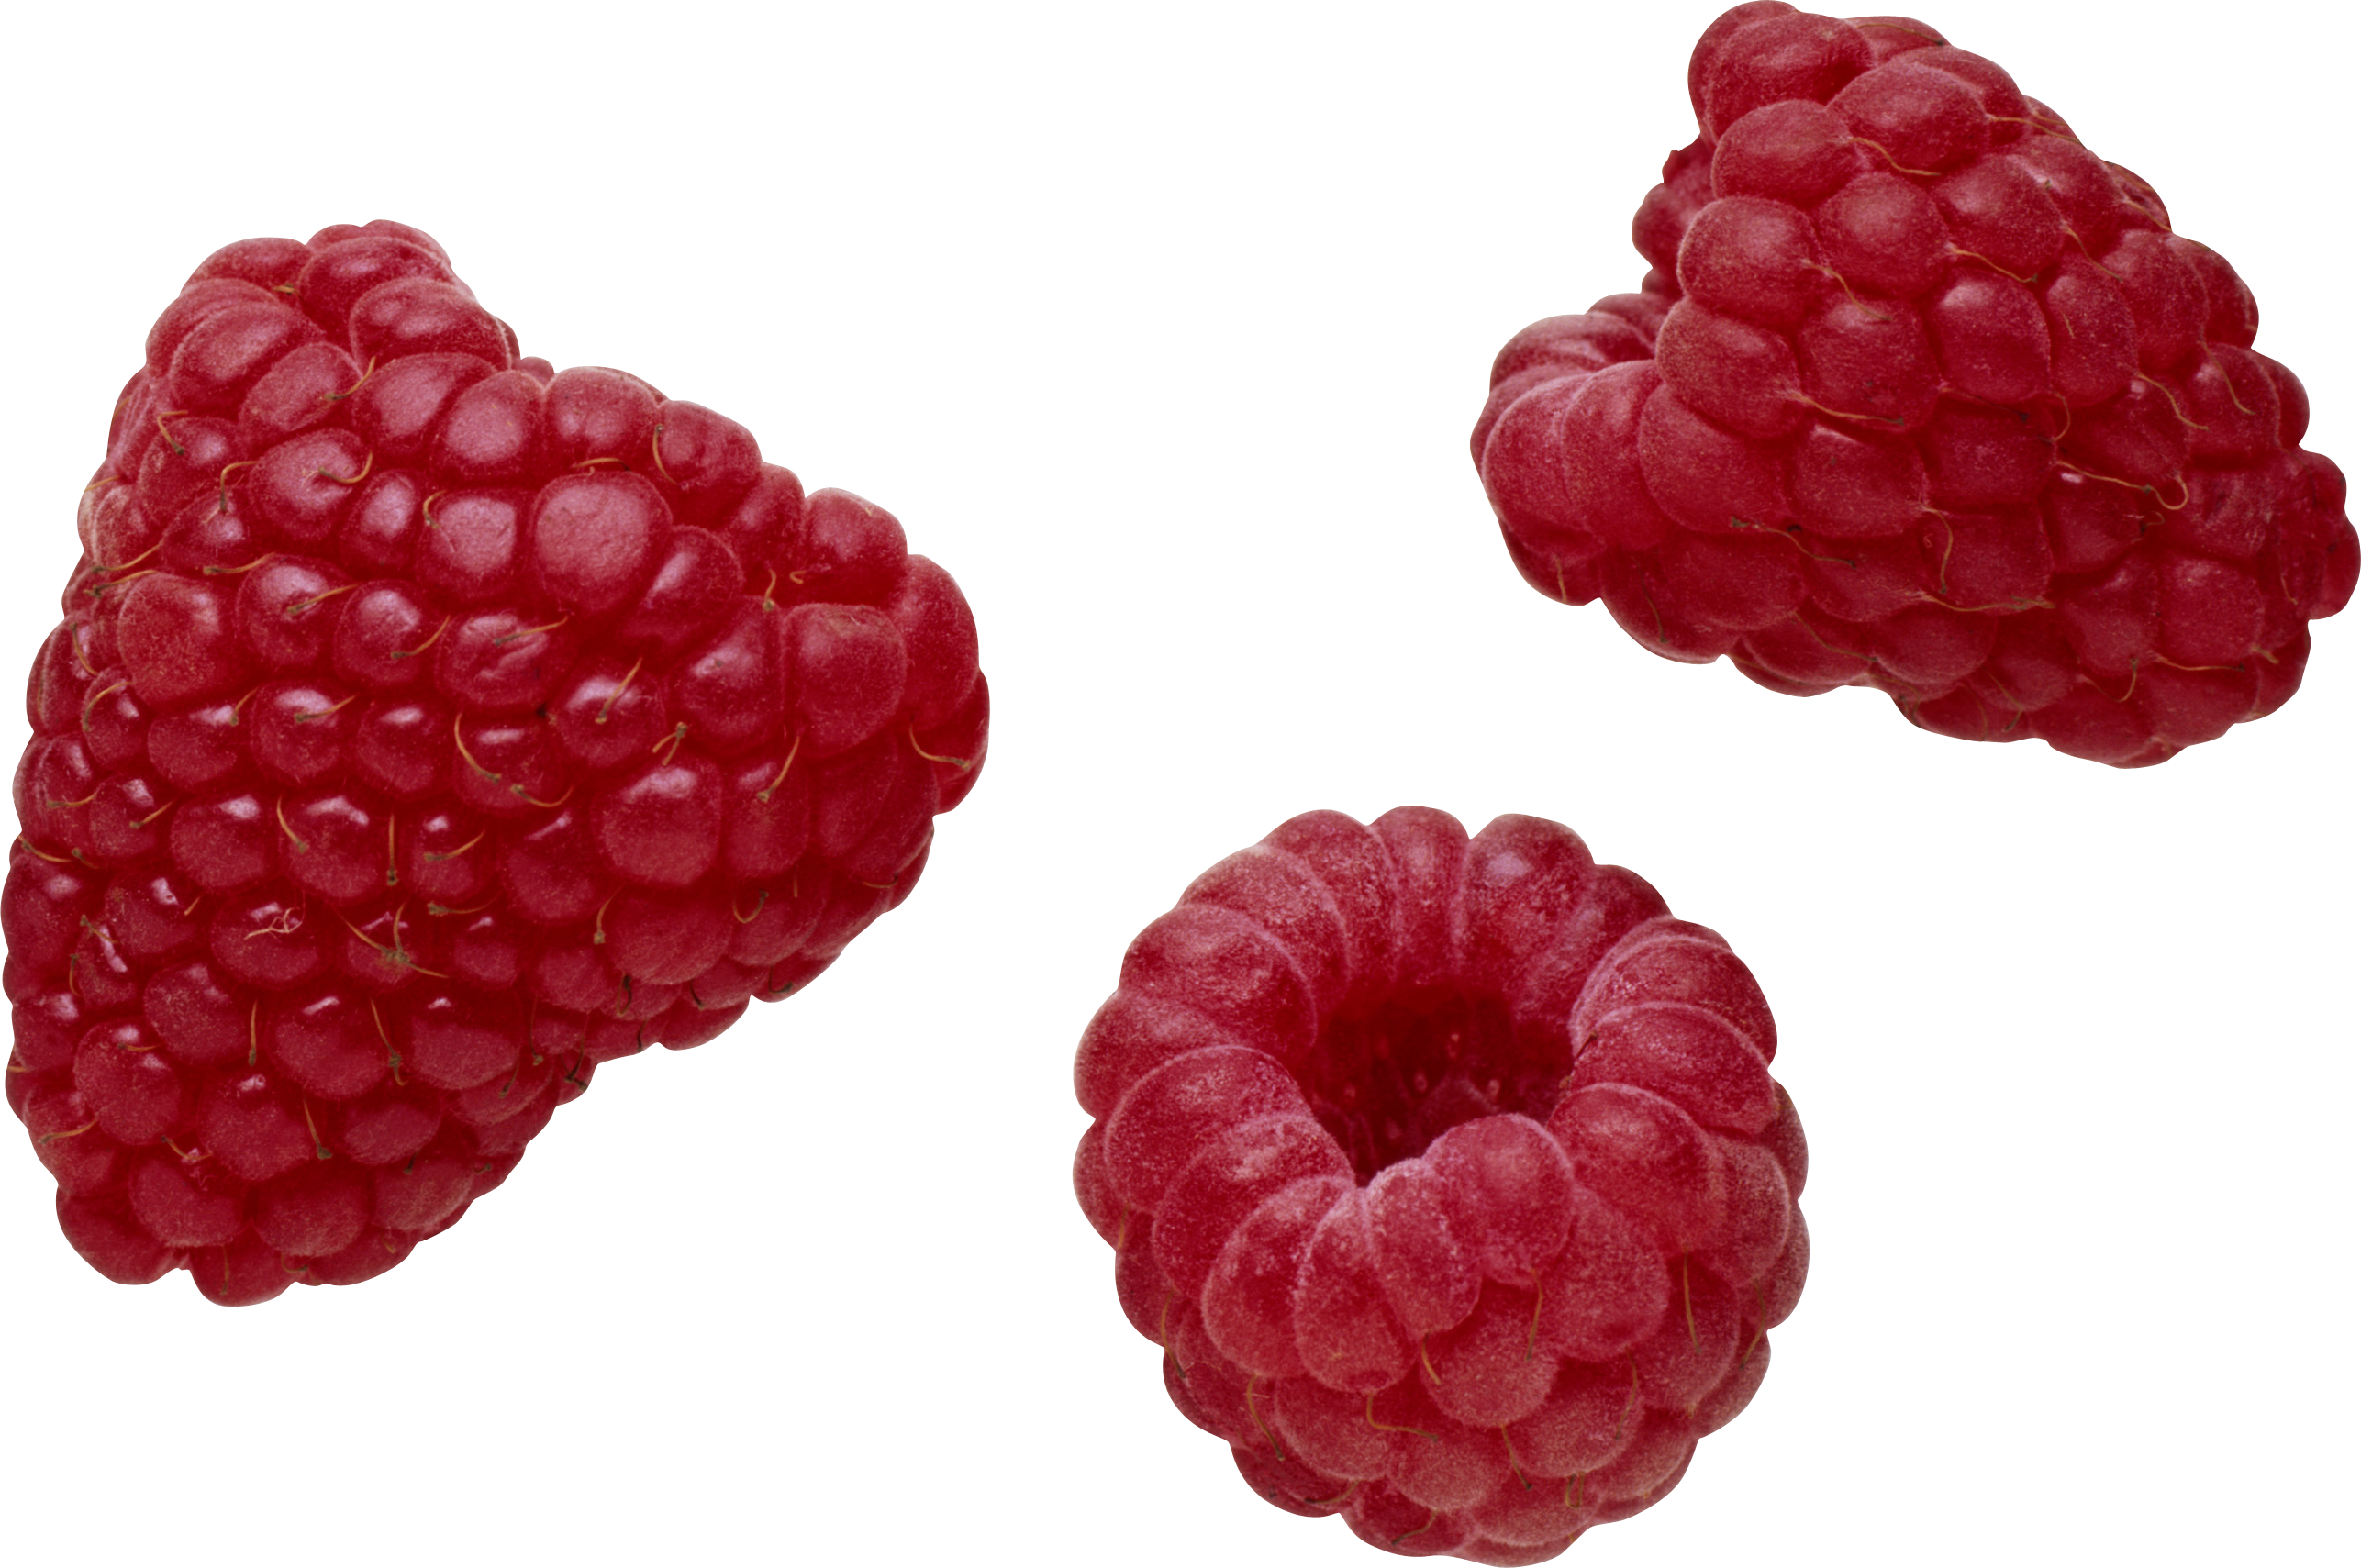 Download Raspberry PNG Image